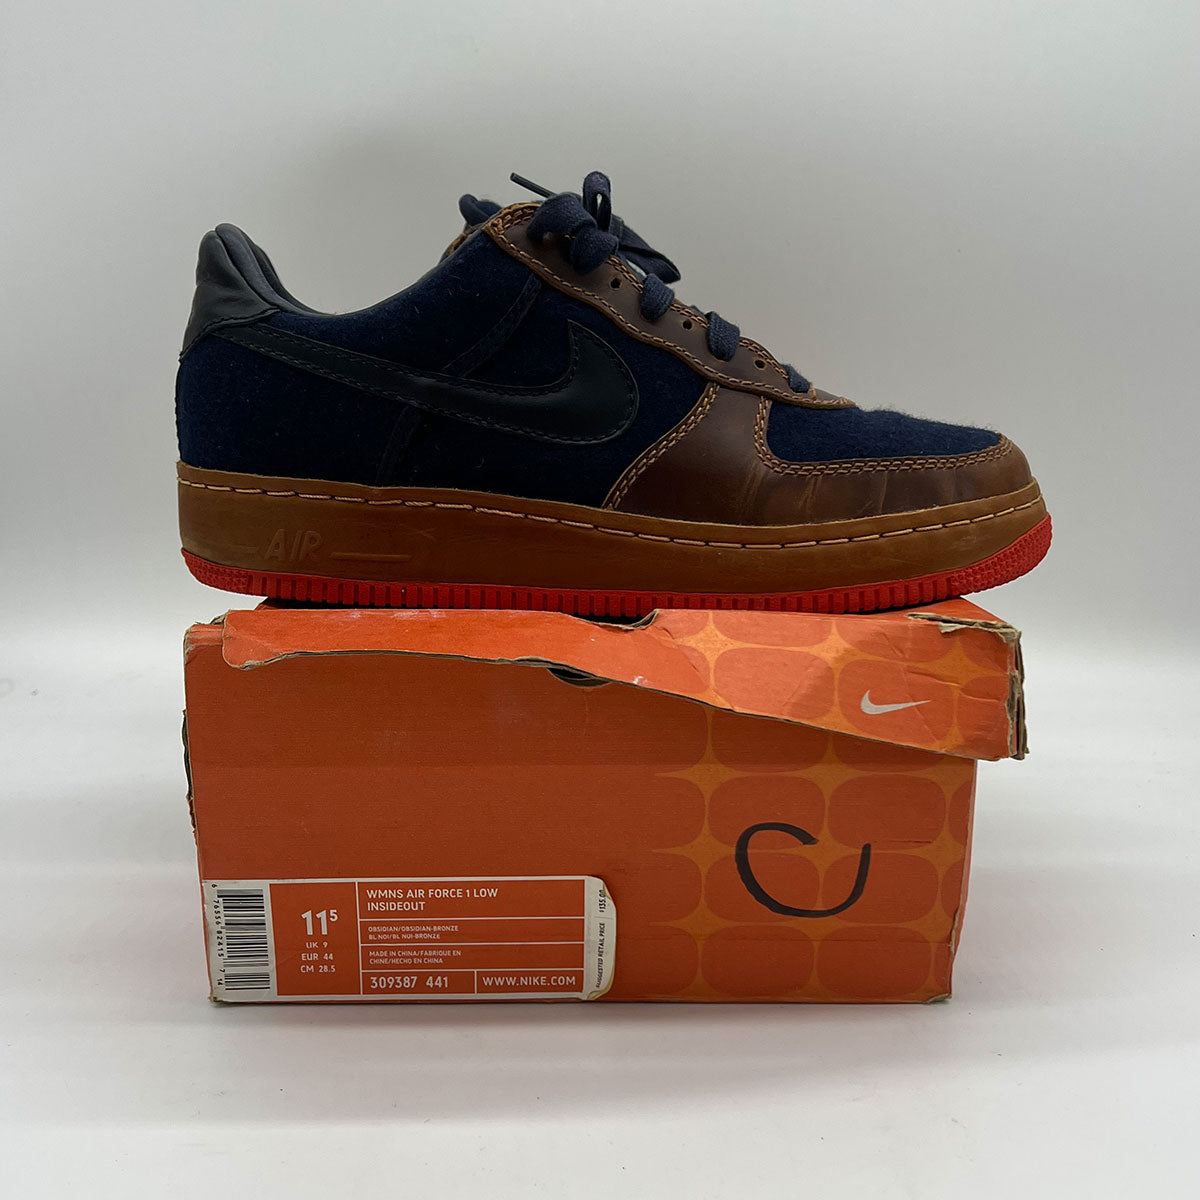 Nike Women's Air Force 1 Low Insideout (Pre-Owned) size 11.5